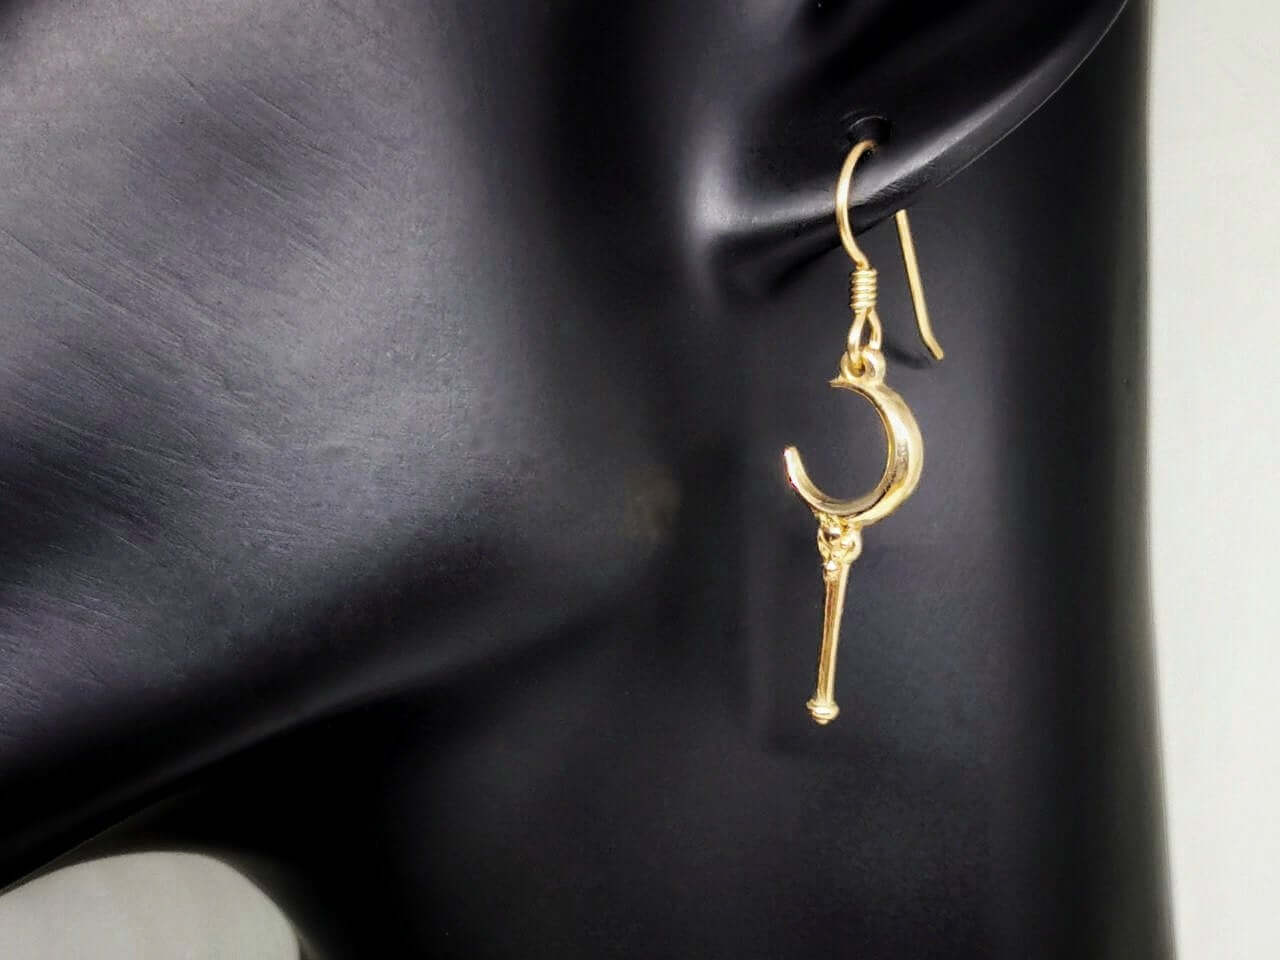 Crescent Moon Wand Earrings in Sterling Silver or Antique Bronze, Lunar Wand Earrings, Magical Girl Anime Earrings, Gamer Girl Earrings, Bronze Anime Jewelry, Antique Bronze Anime Earrings, Bronze Anime Earrings, Crescent Moon Wand Earrings